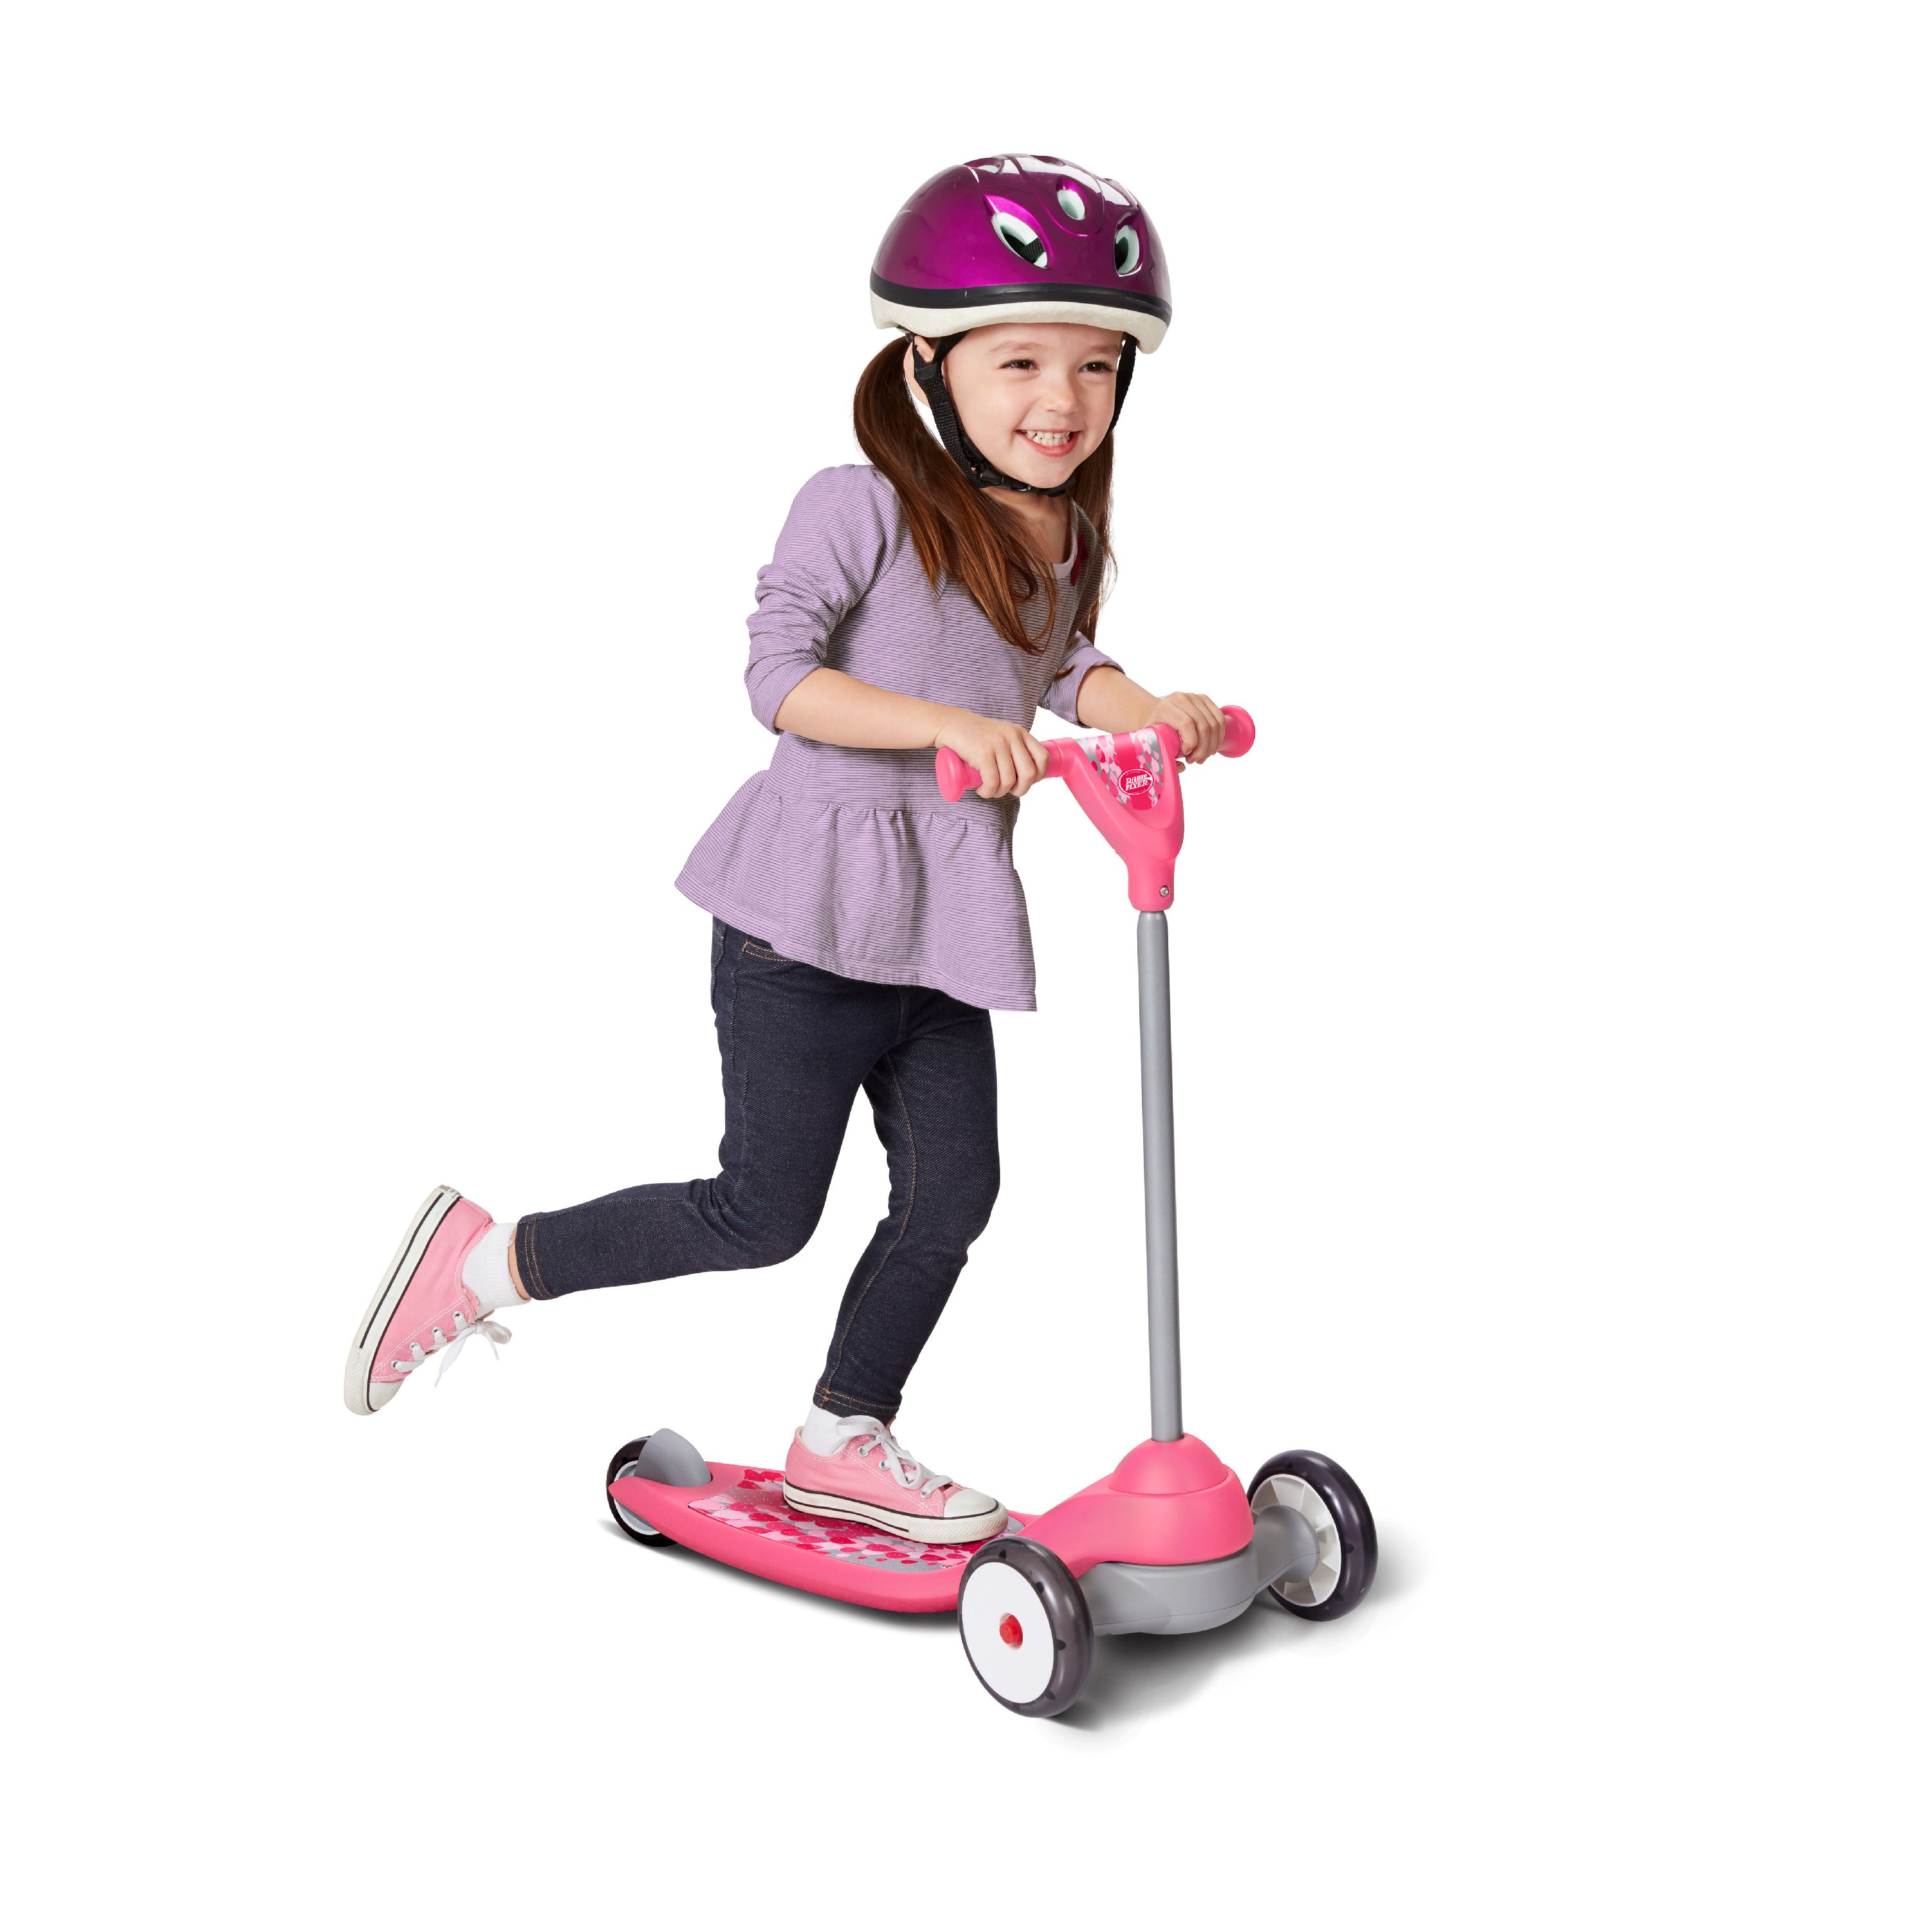 Radio Flyer, My 1st Scooter Sparkle, Three Wheel Scooter, Pink - image 2 of 5